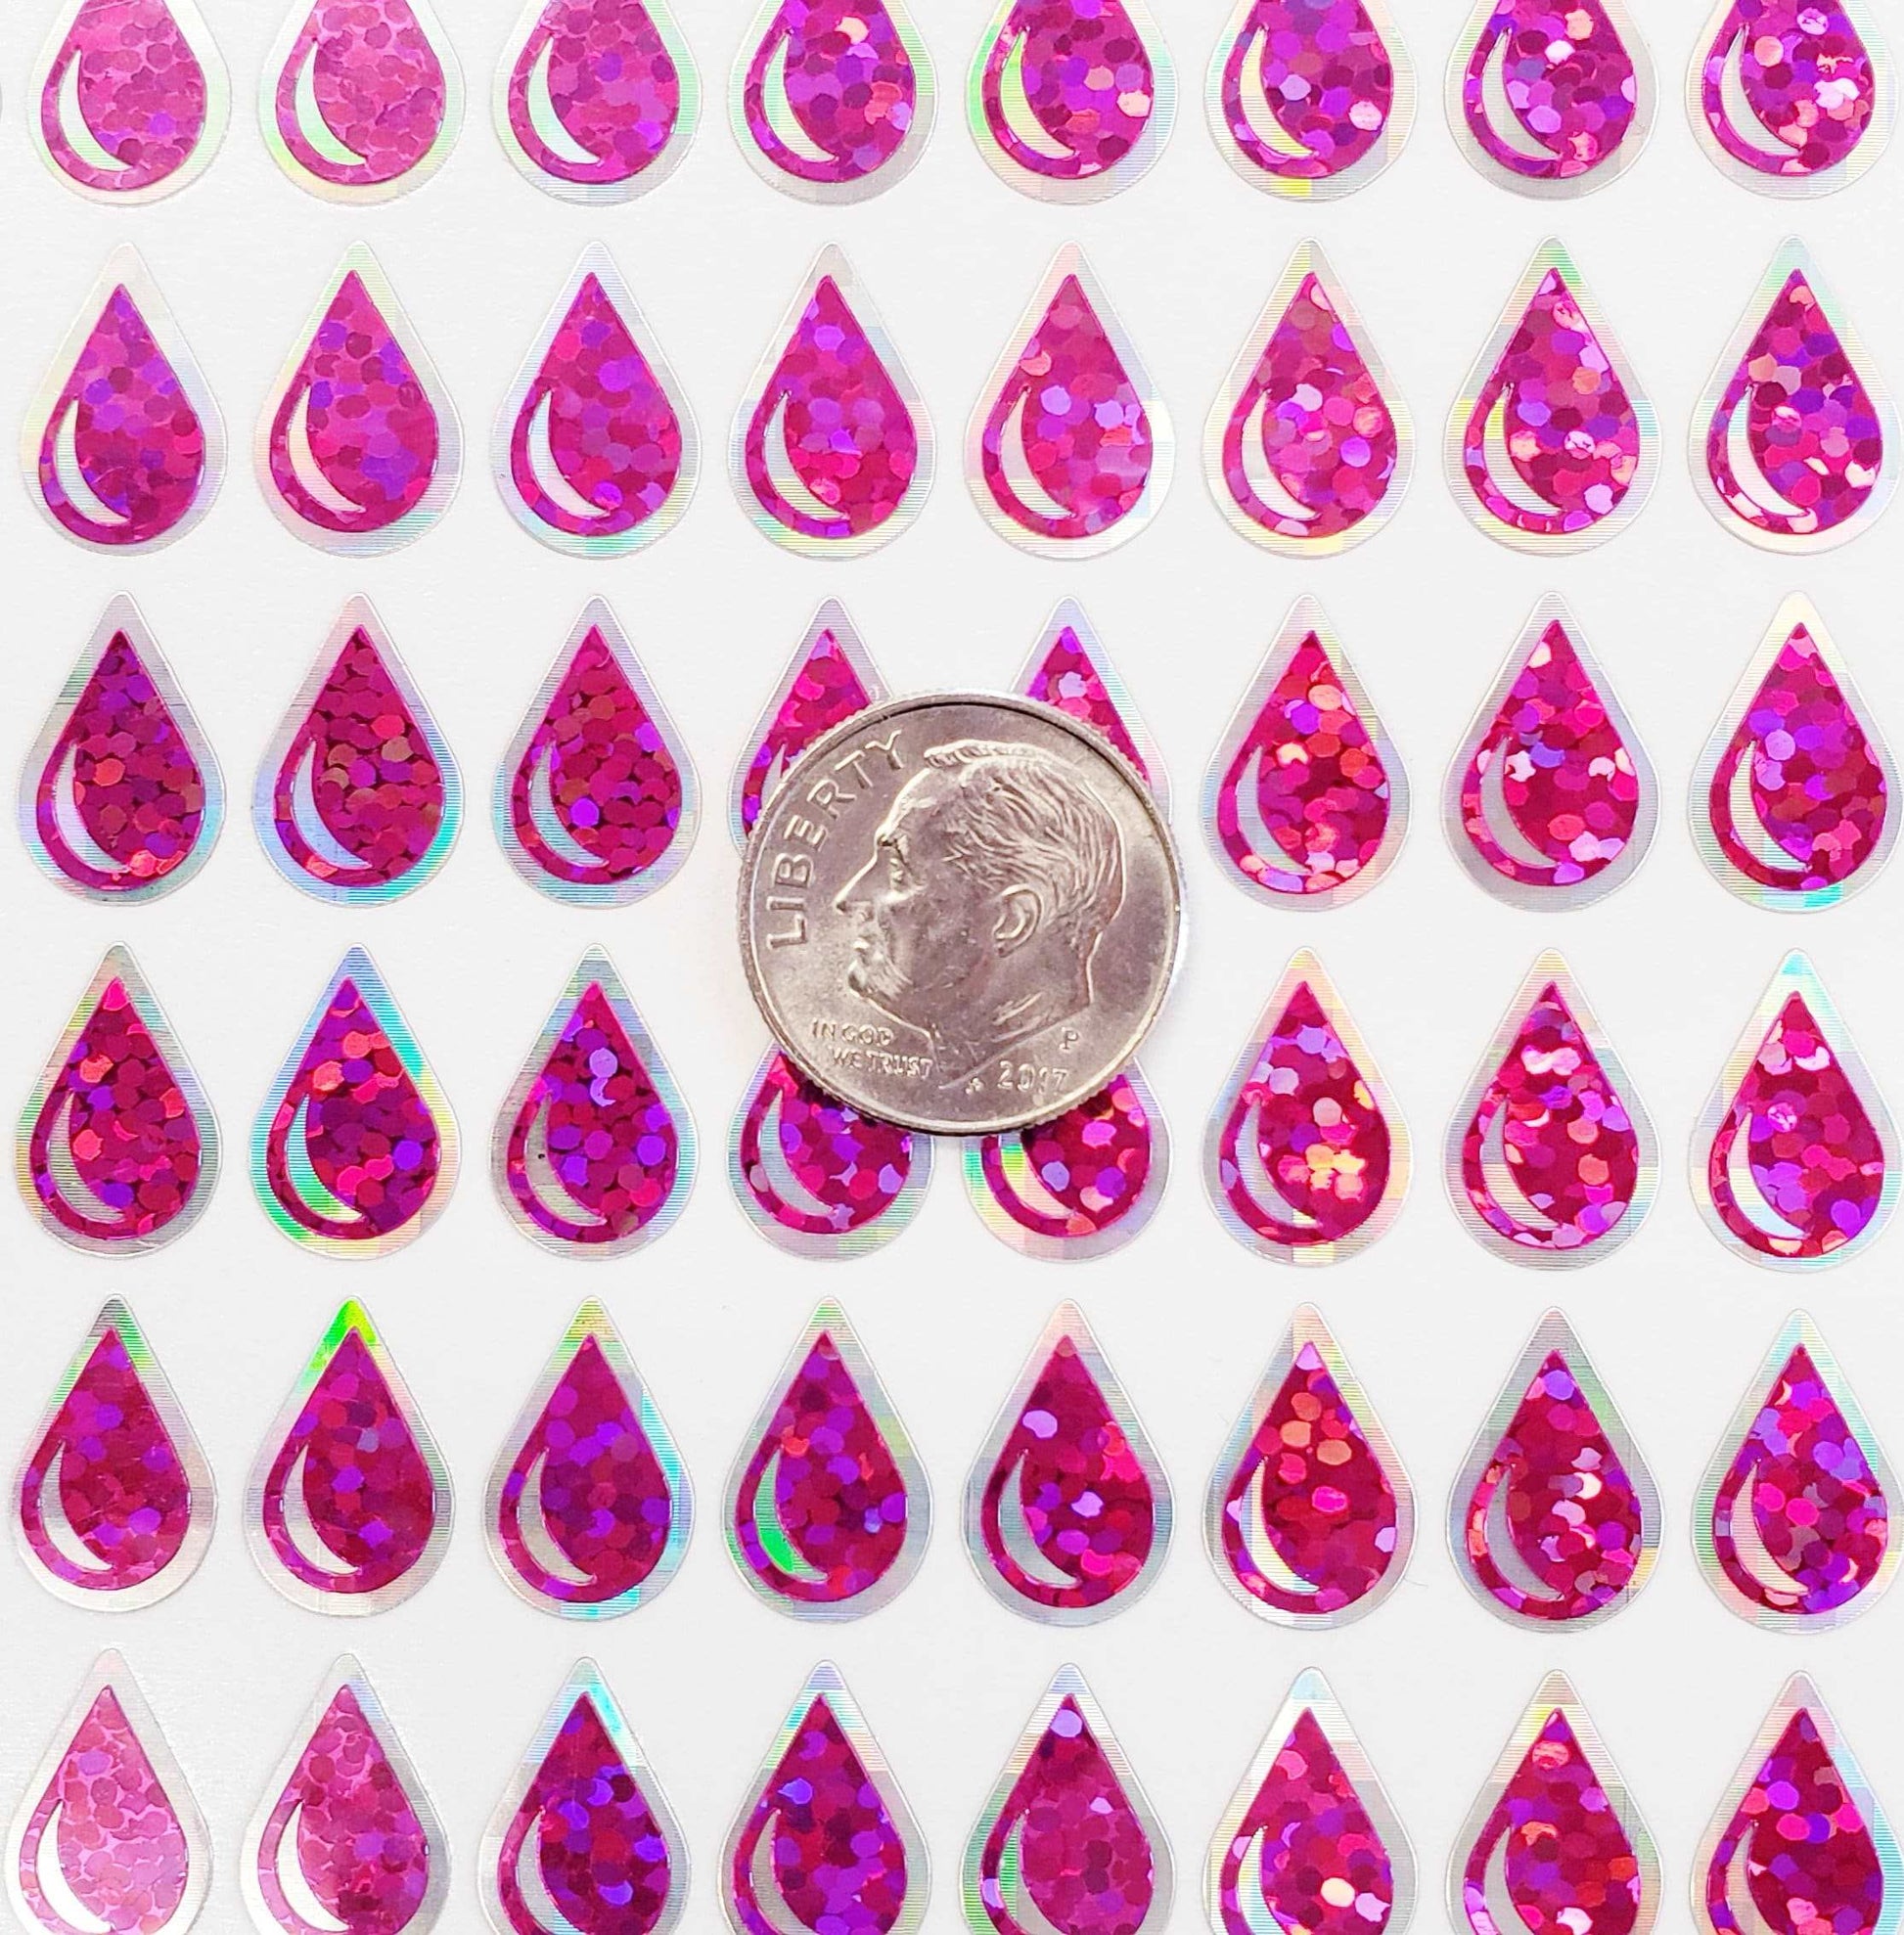 Hot Pink Water Drop Stickers, set of 136 sparkly magenta pink raindrop vinyl decals, drink water tracker for journals and notebooks